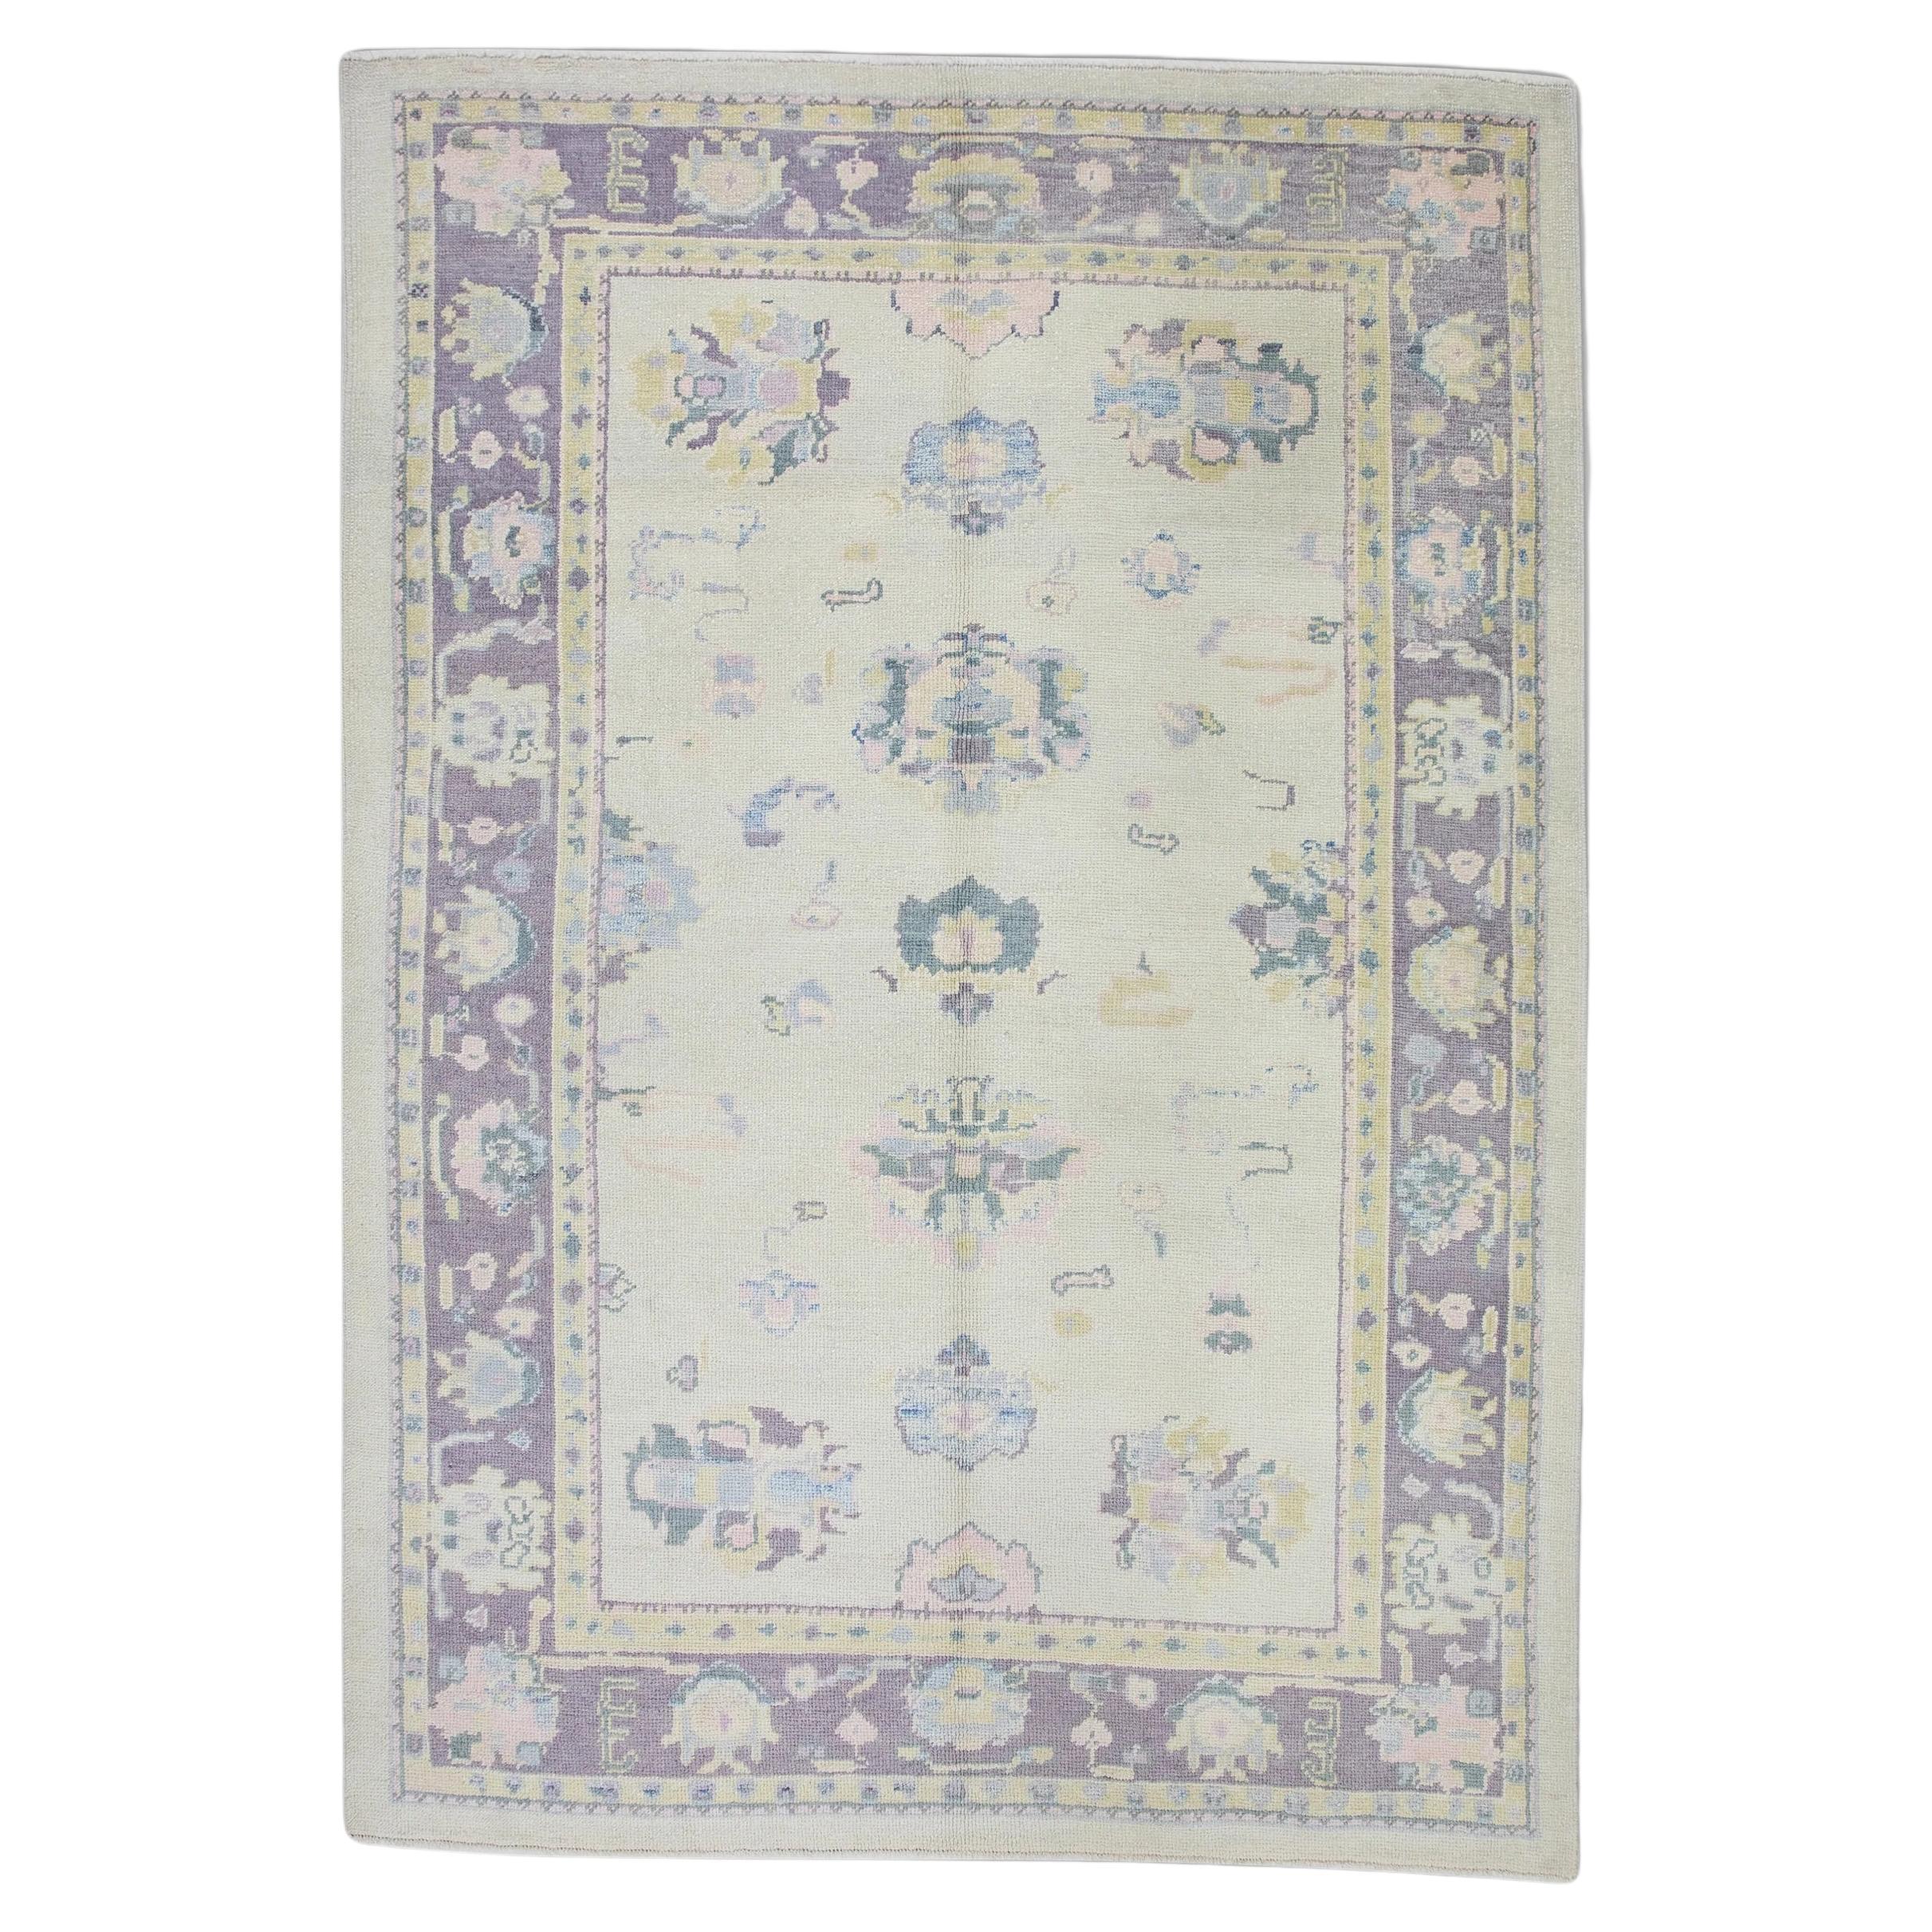 Cream Handwoven Wool Turkish Oushak Rug in Purple Floral Design 6'7" x 8'10" For Sale